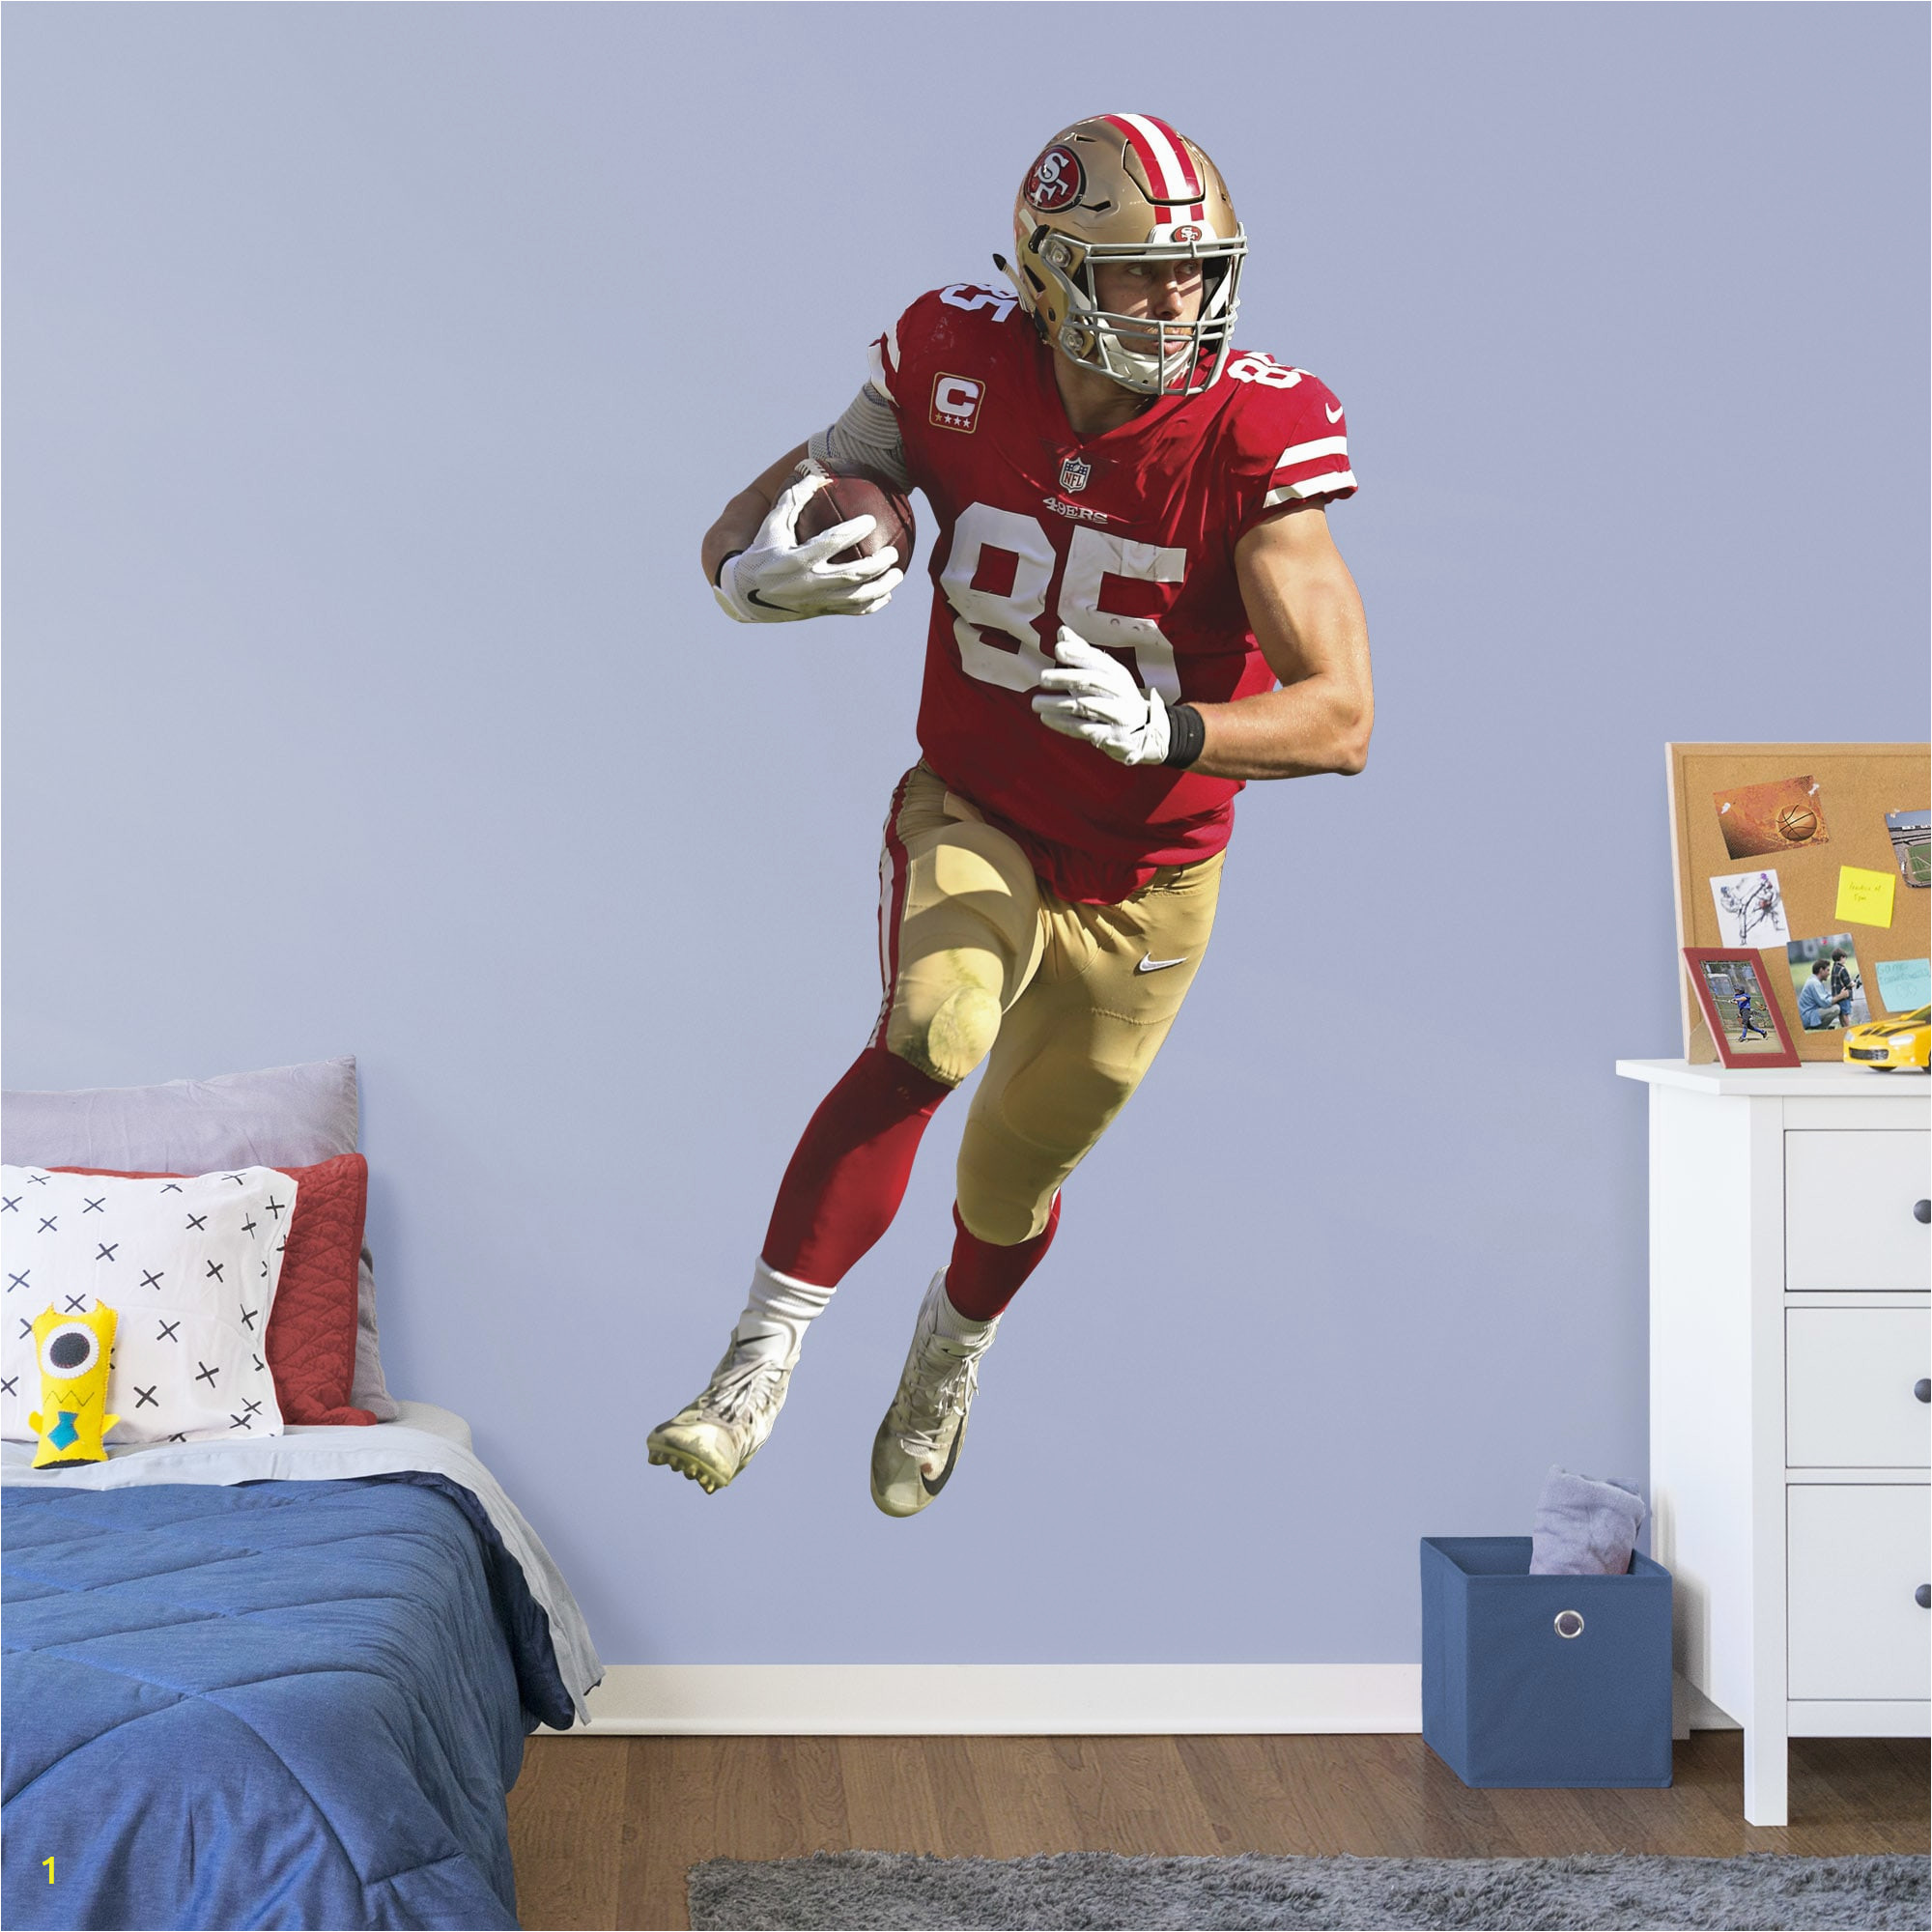 Removable Wall Murals Canada George Kittle Life Size Ficially Licensed Nfl Removable